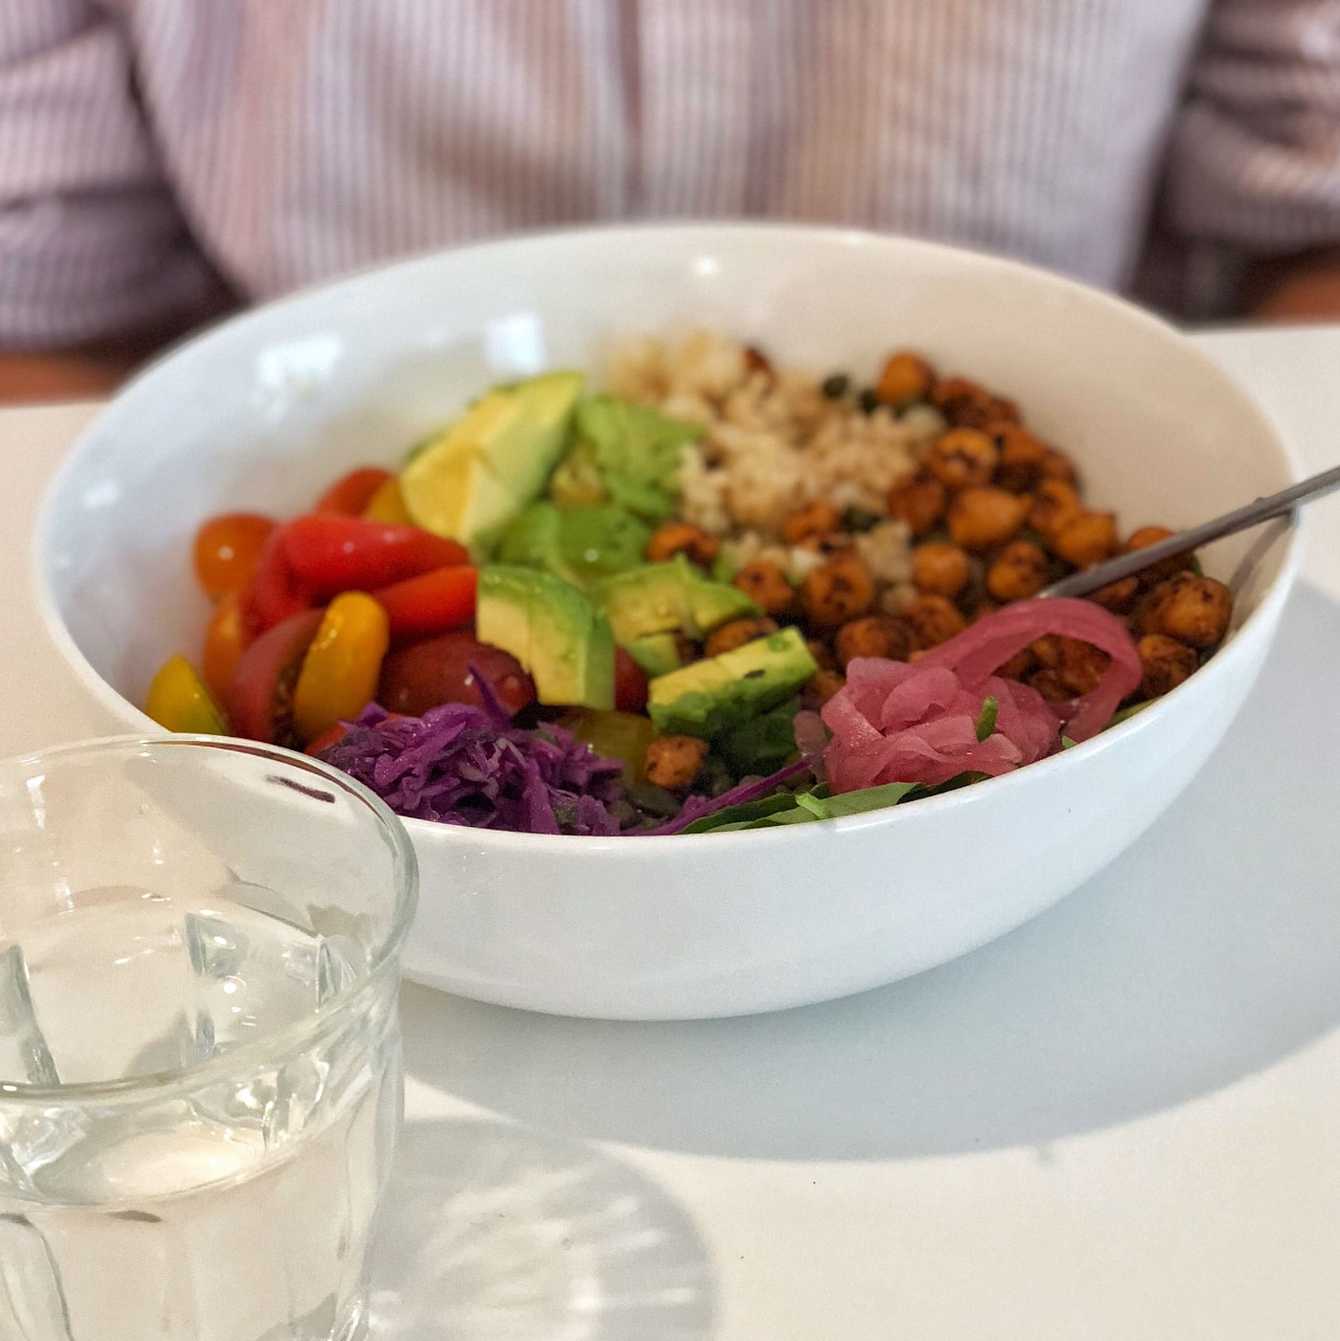 A salad bowl with avocado, tomatoes, couscous and chickpeas